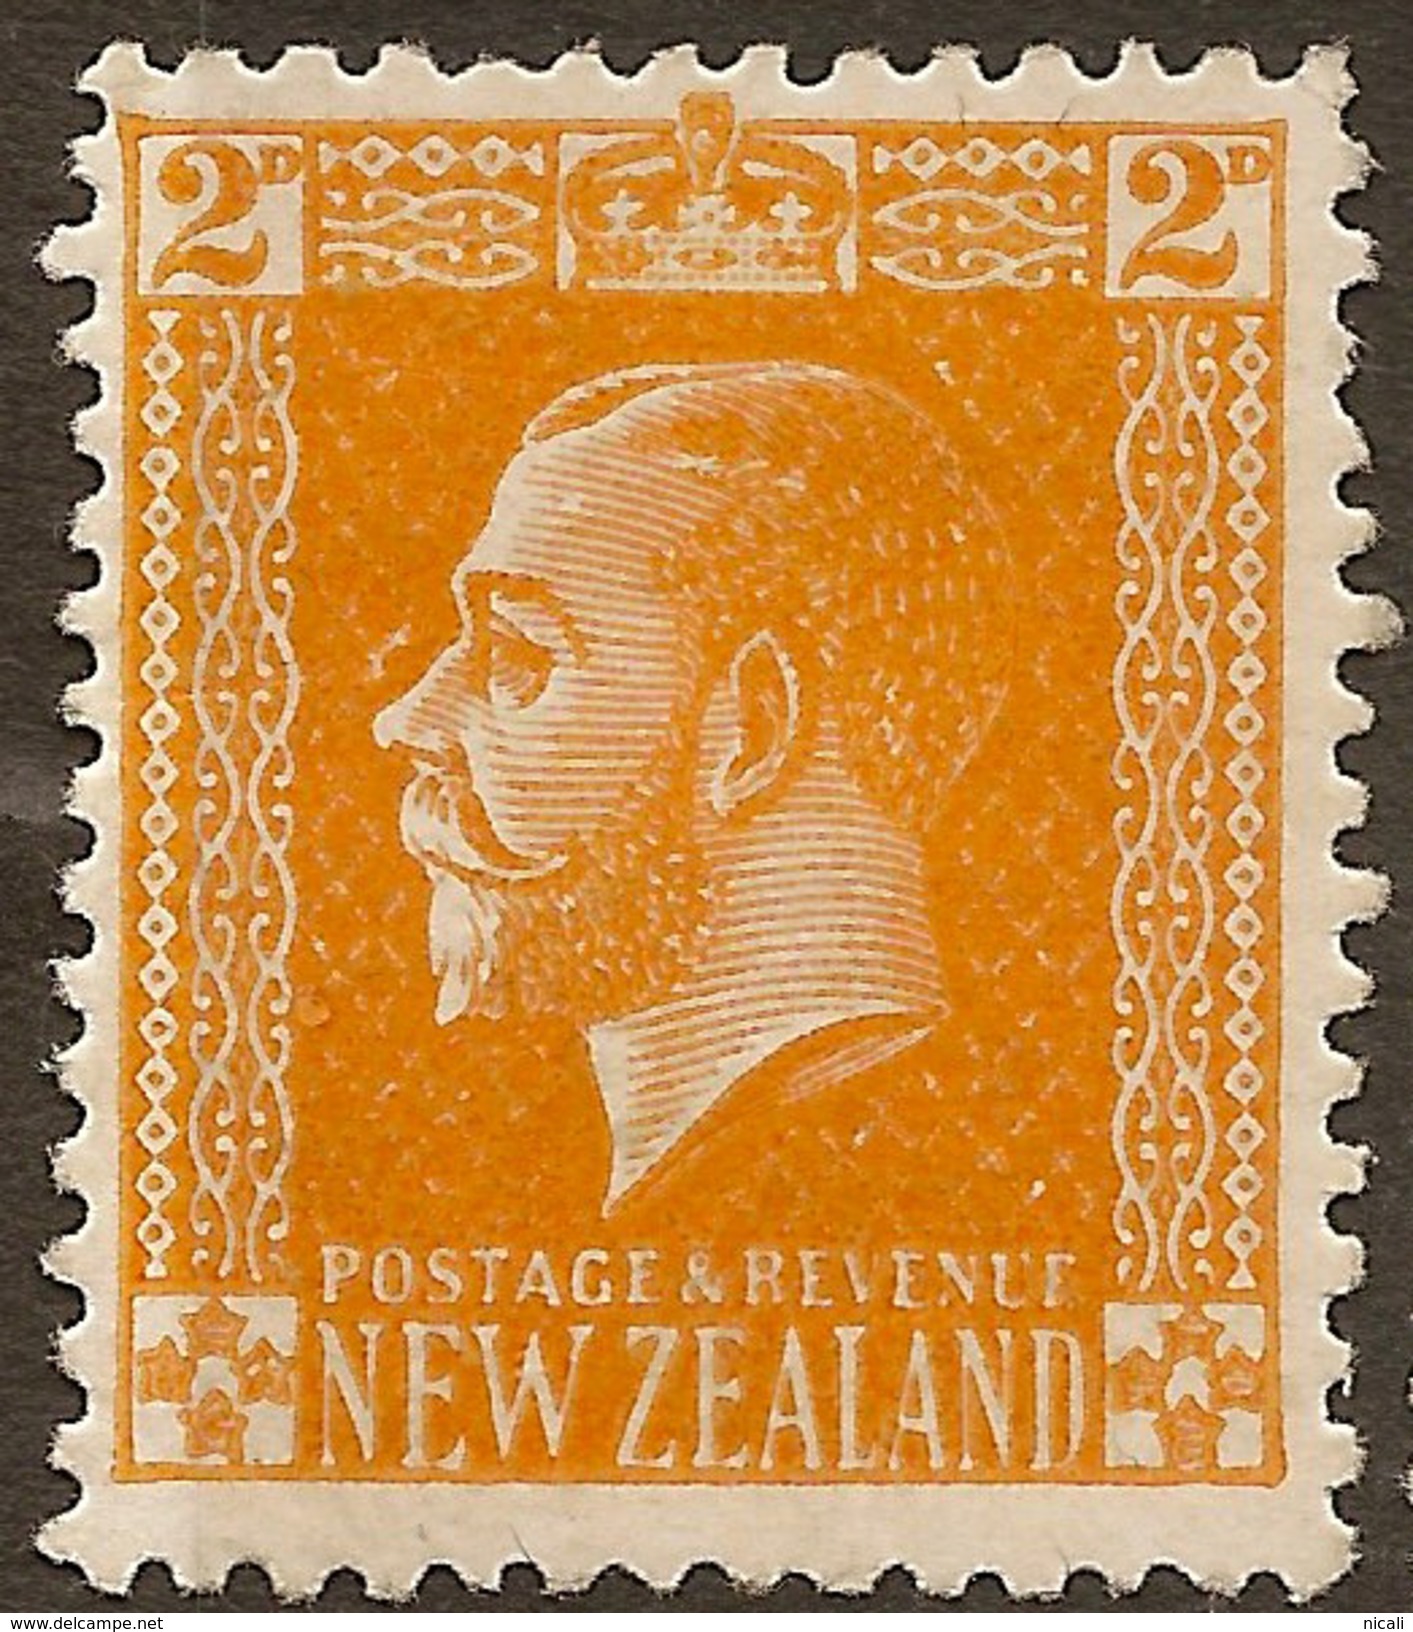 NZ 1915 2d KGV Surface P14 SG 448b HM #AAT181 - Unused Stamps